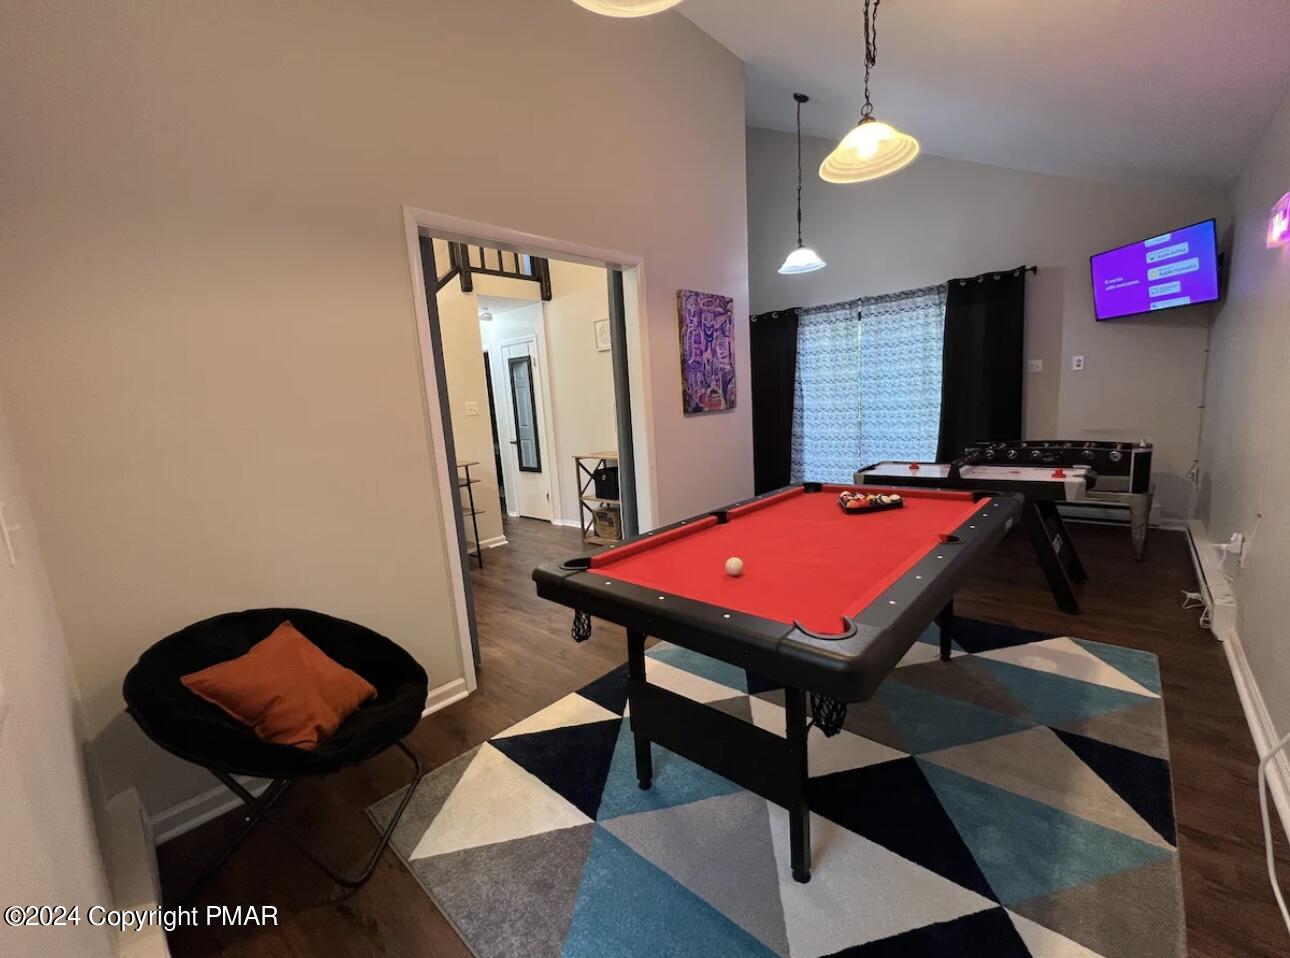 a room with furniture pool table and windows